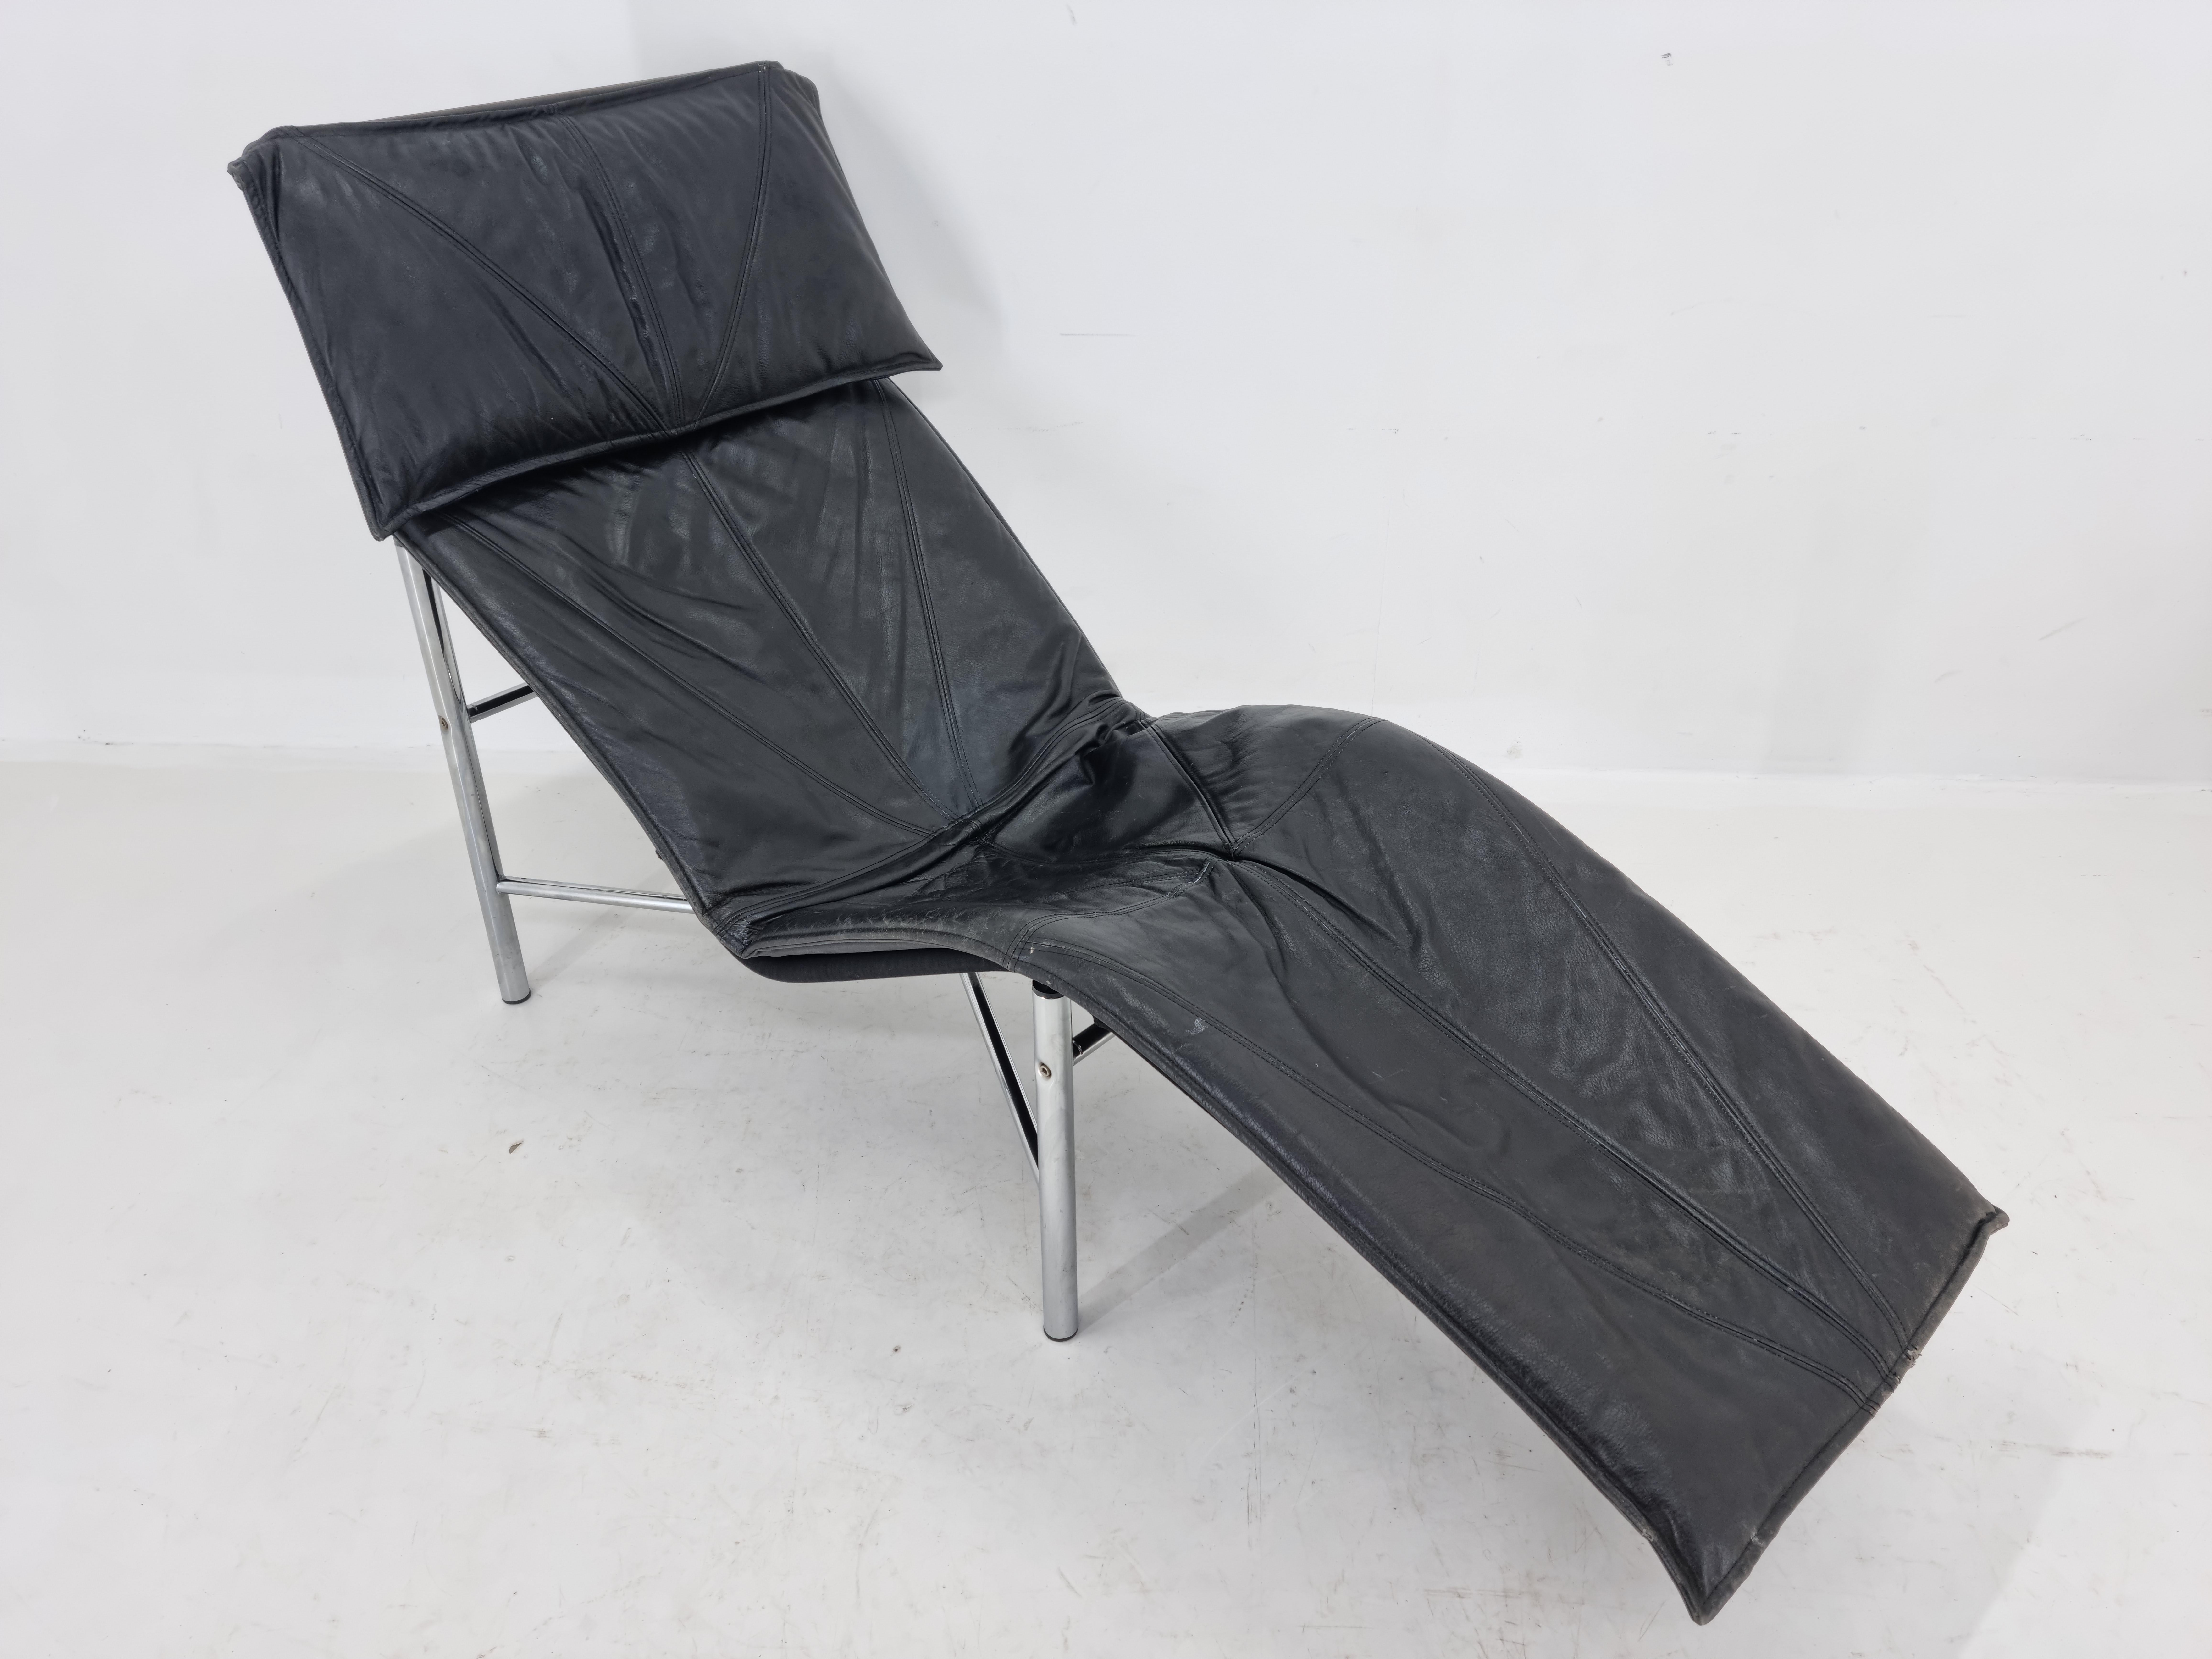 Midcentury Skye Chaise Lounge Chair for IKEA by Tord Björklund, Sweden, 1970s For Sale 1